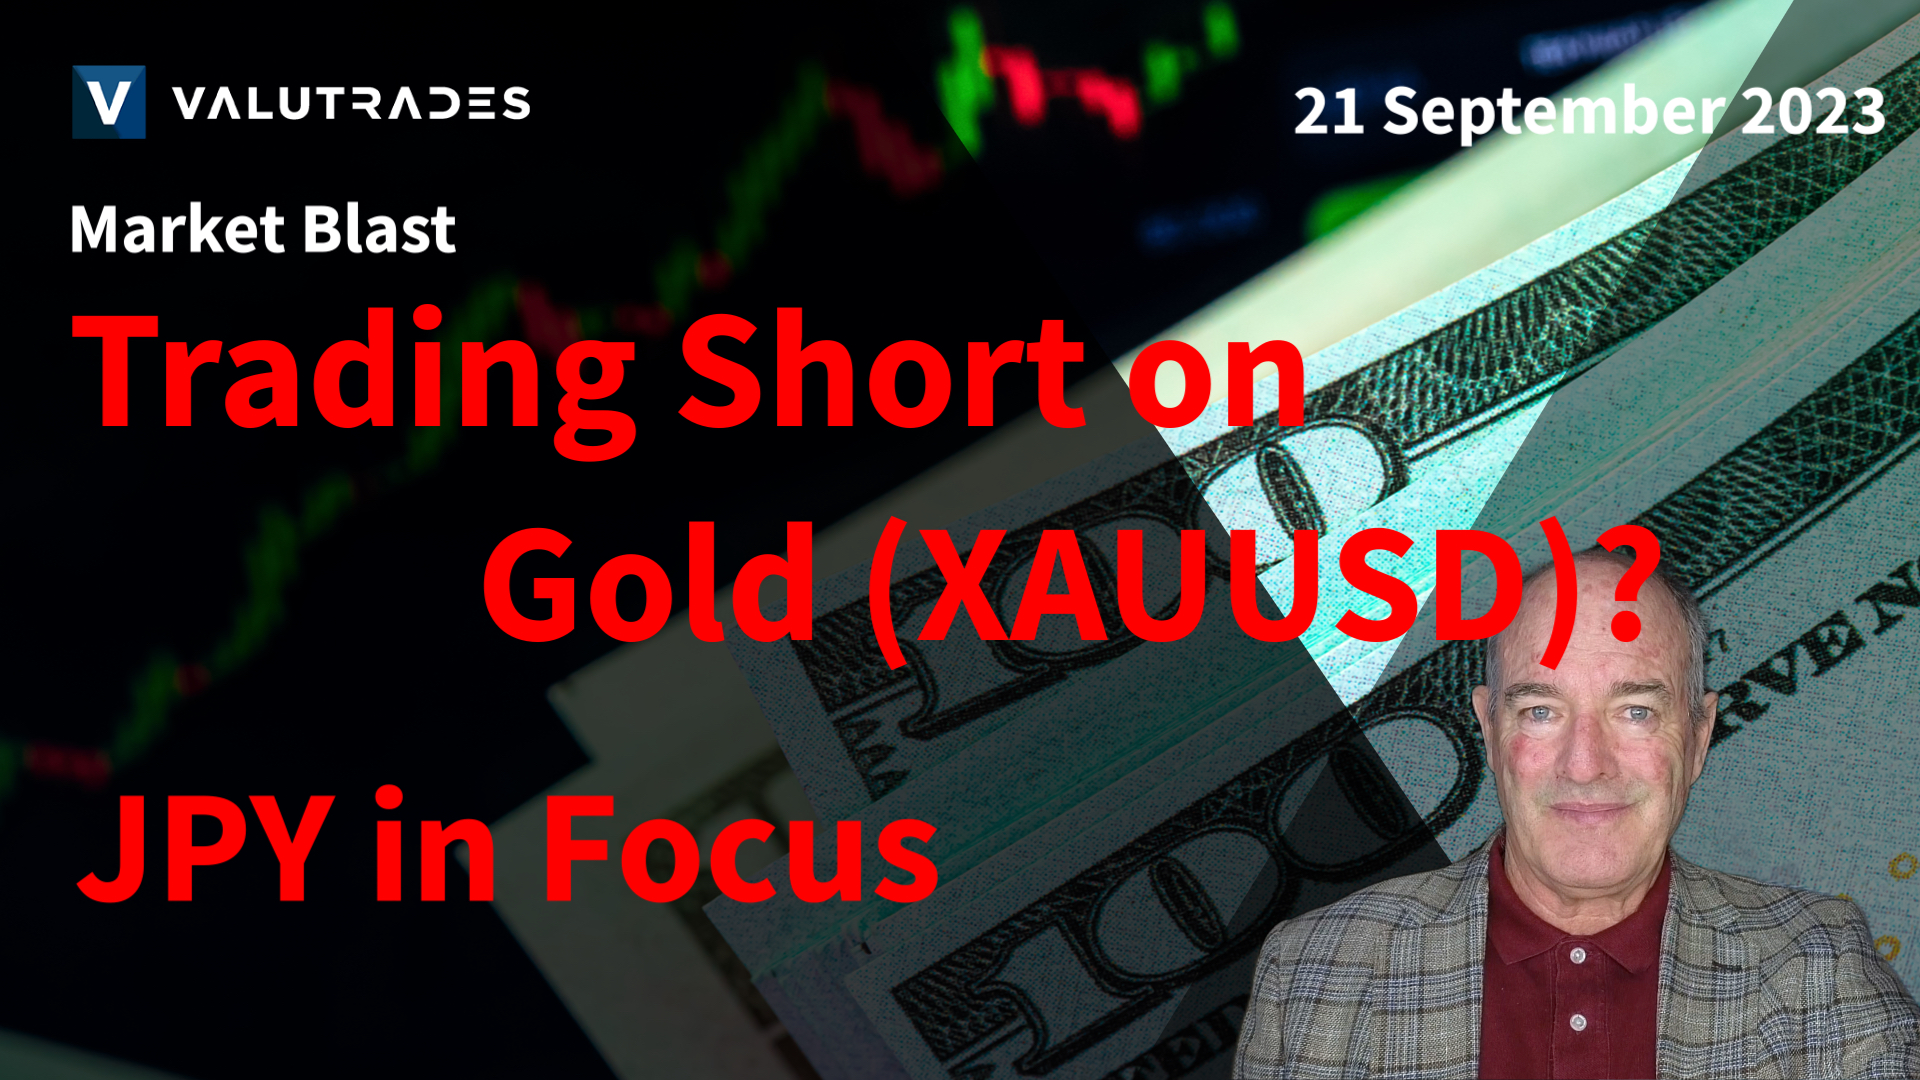 Trading Short on Gold (XAUUSD)?  USD, GBP & CHF Volatility. JPY in Focus.